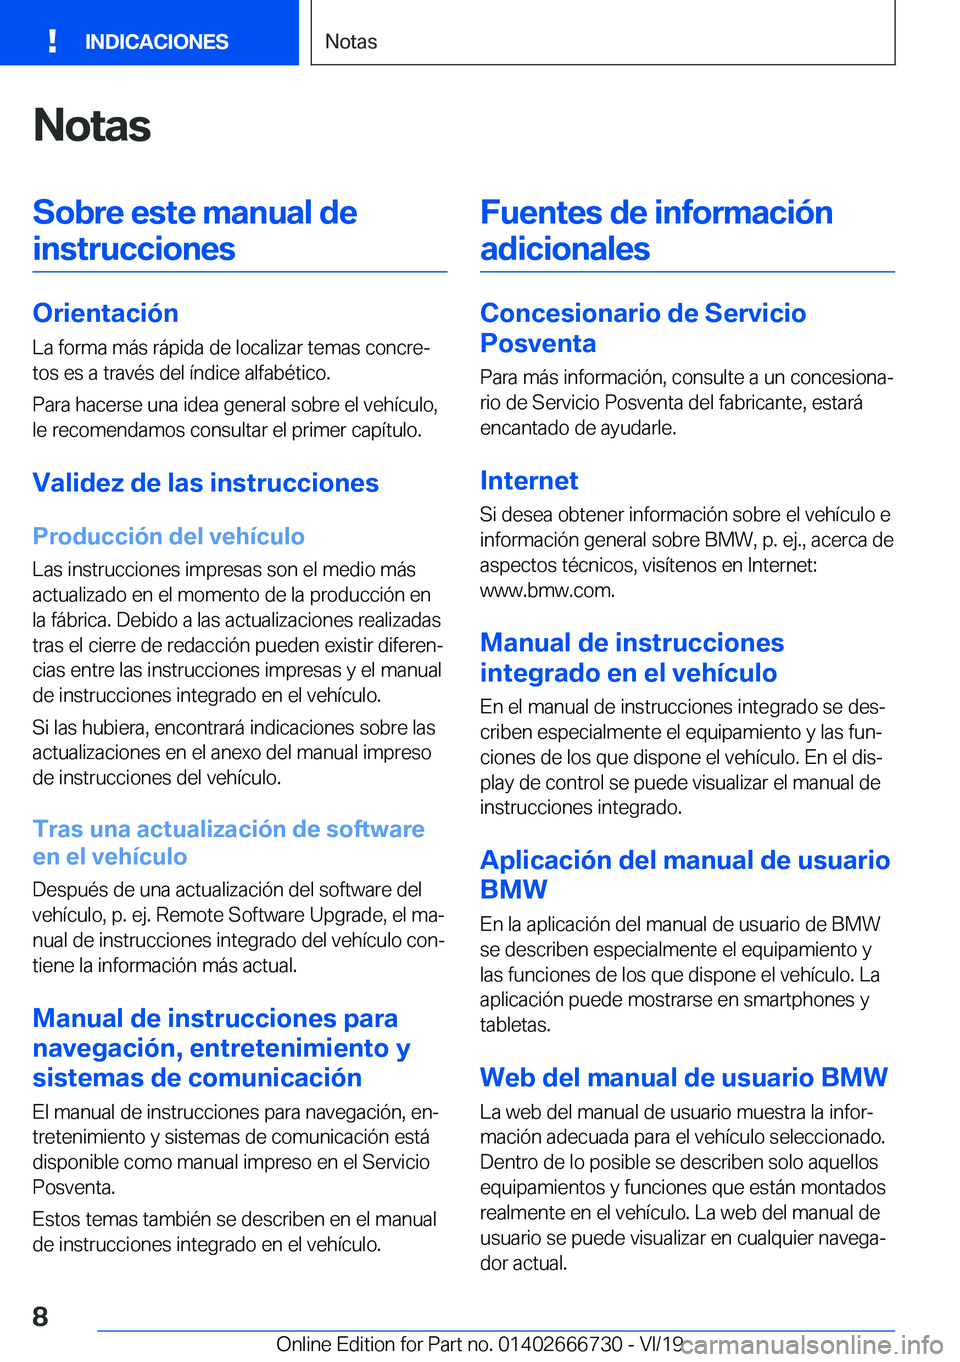 BMW M5 2020  Manuales de Empleo (in Spanish) �N�o�t�a�s�S�o�b�r�e��e�s�t�e��m�a�n�u�a�l��d�e�i�n�s�t�r�u�c�c�i�o�n�e�s
�O�r�i�e�n�t�a�c�i�